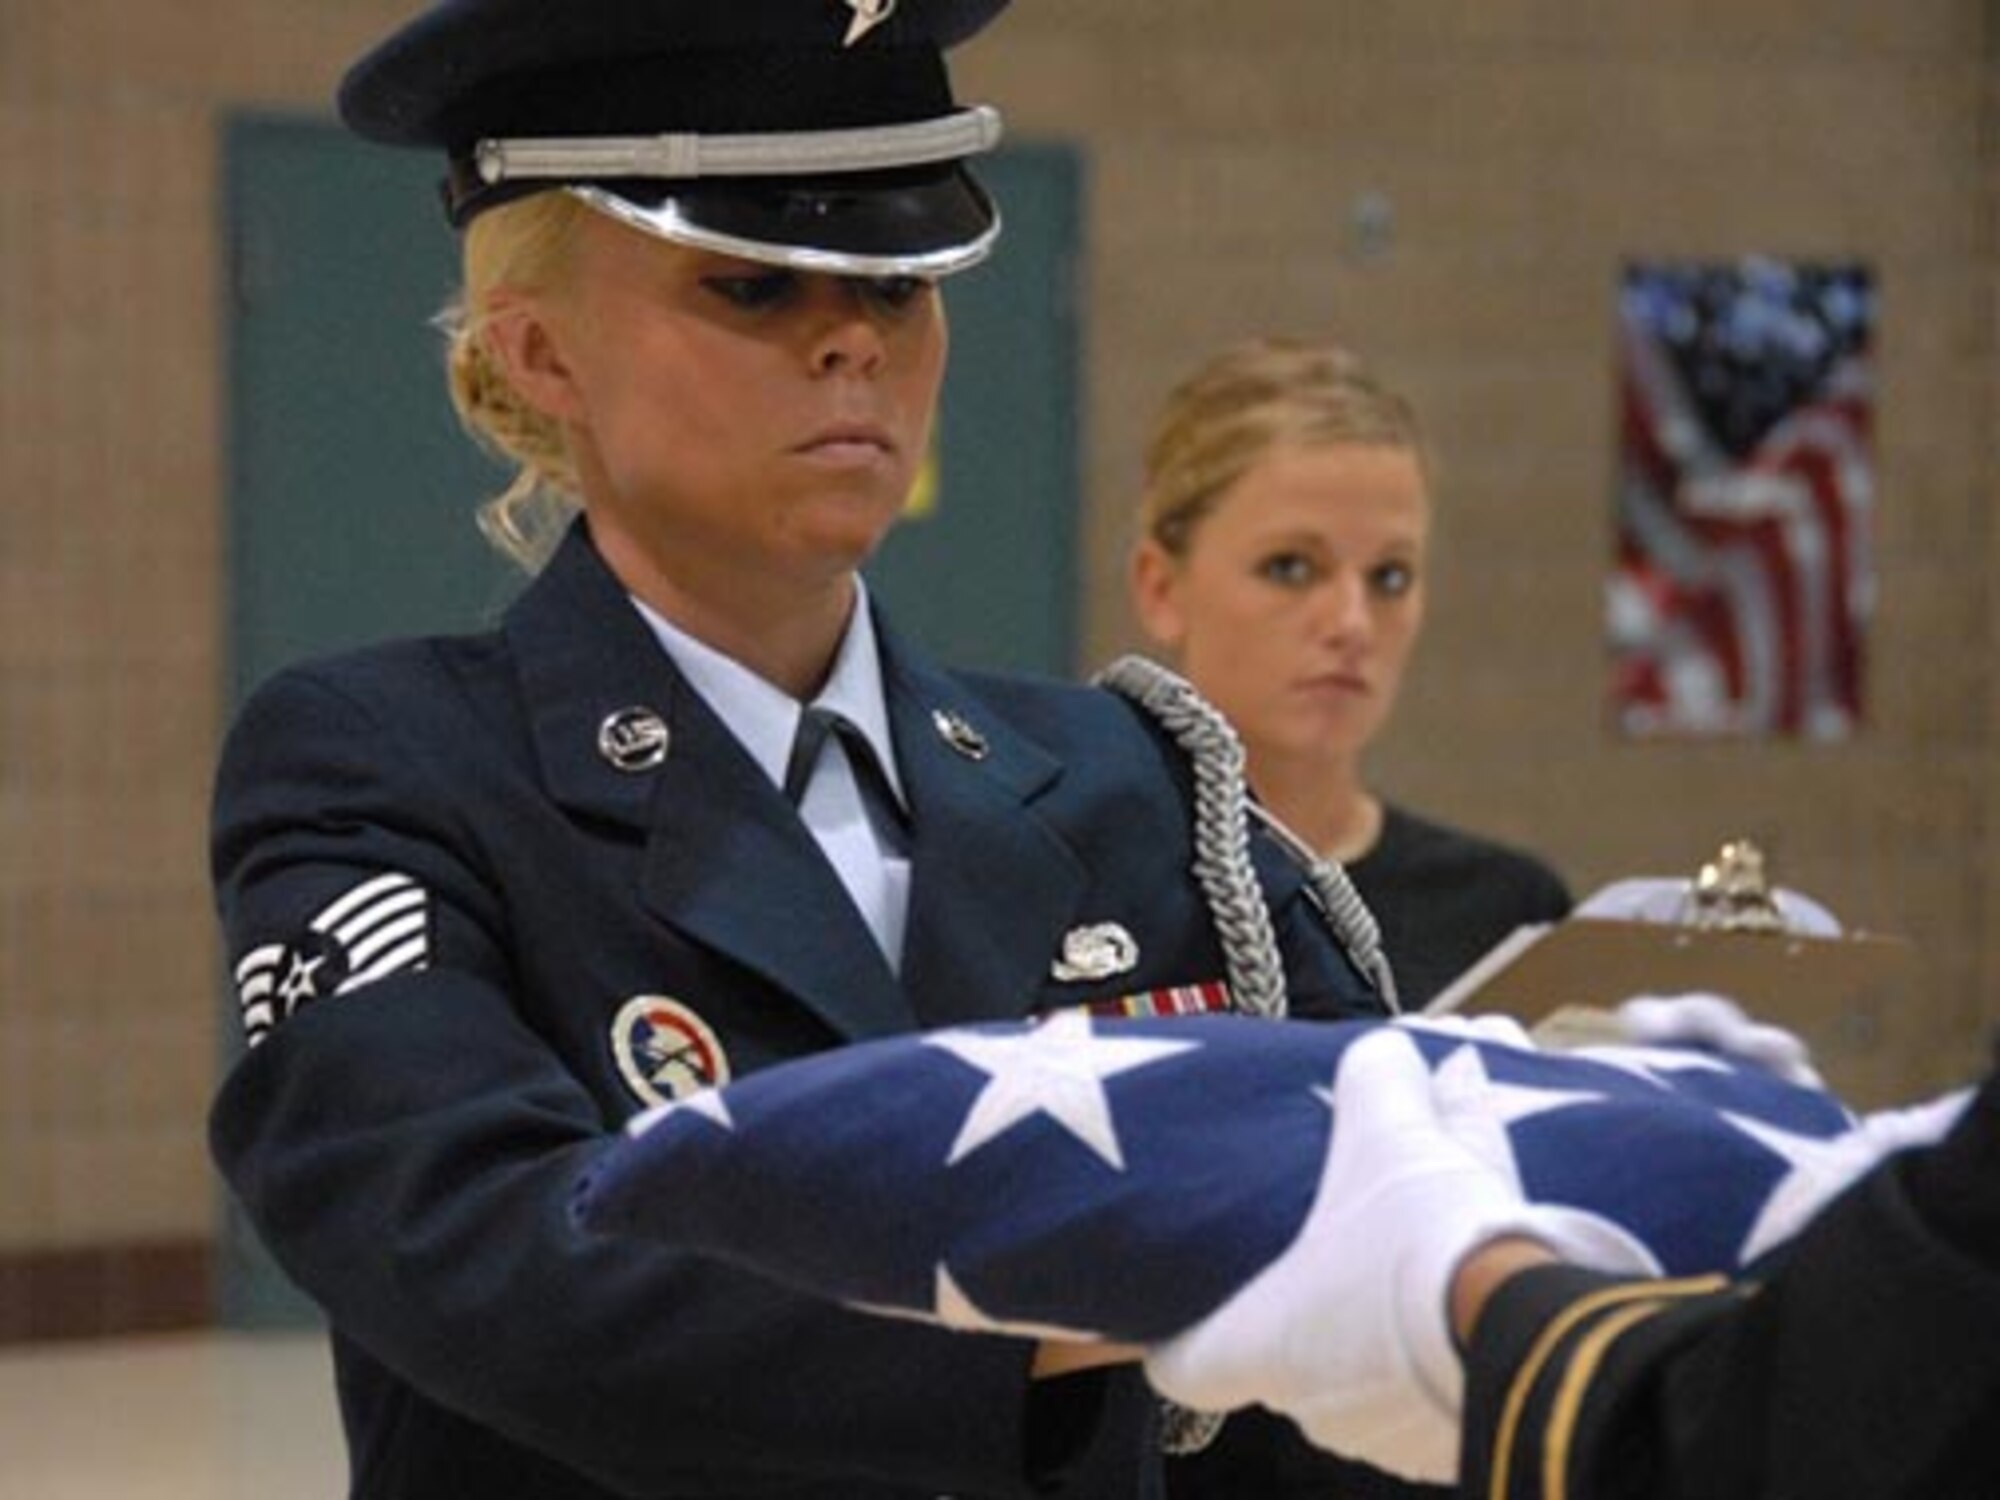 Technical Sgt. Jolene R. Savageau, 119th Wing, accepts the United States flag during a flag folding practice run on examination day as instructor PFC Kayla Staub, North Dakota Army National Guard, looks on with a critical eye.  (USAF photo/SMSgt. David Lipp)
